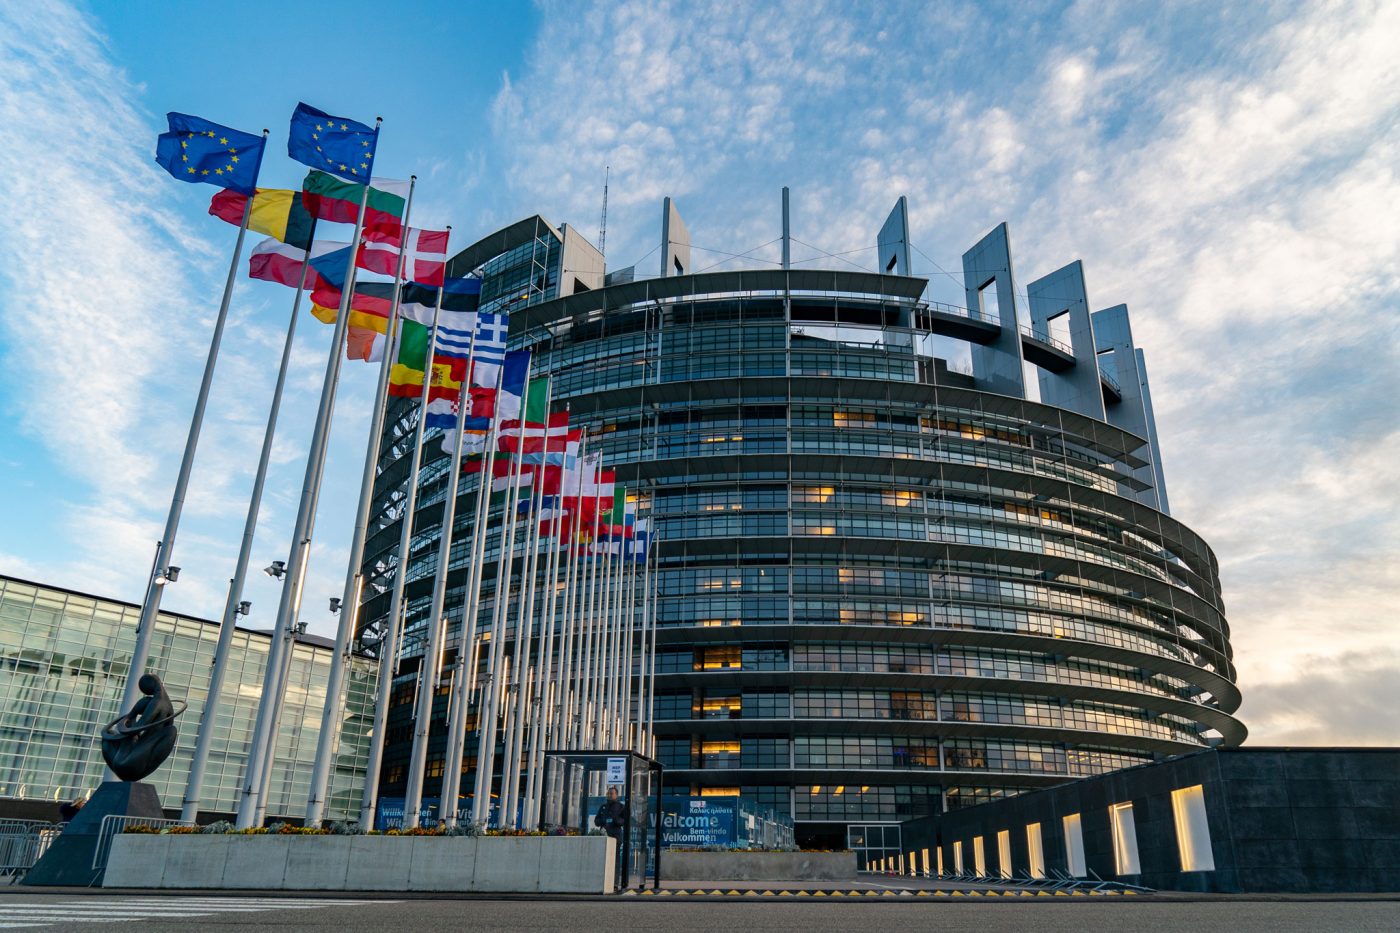 Photo: The European Parliament building in Strasbourg, France